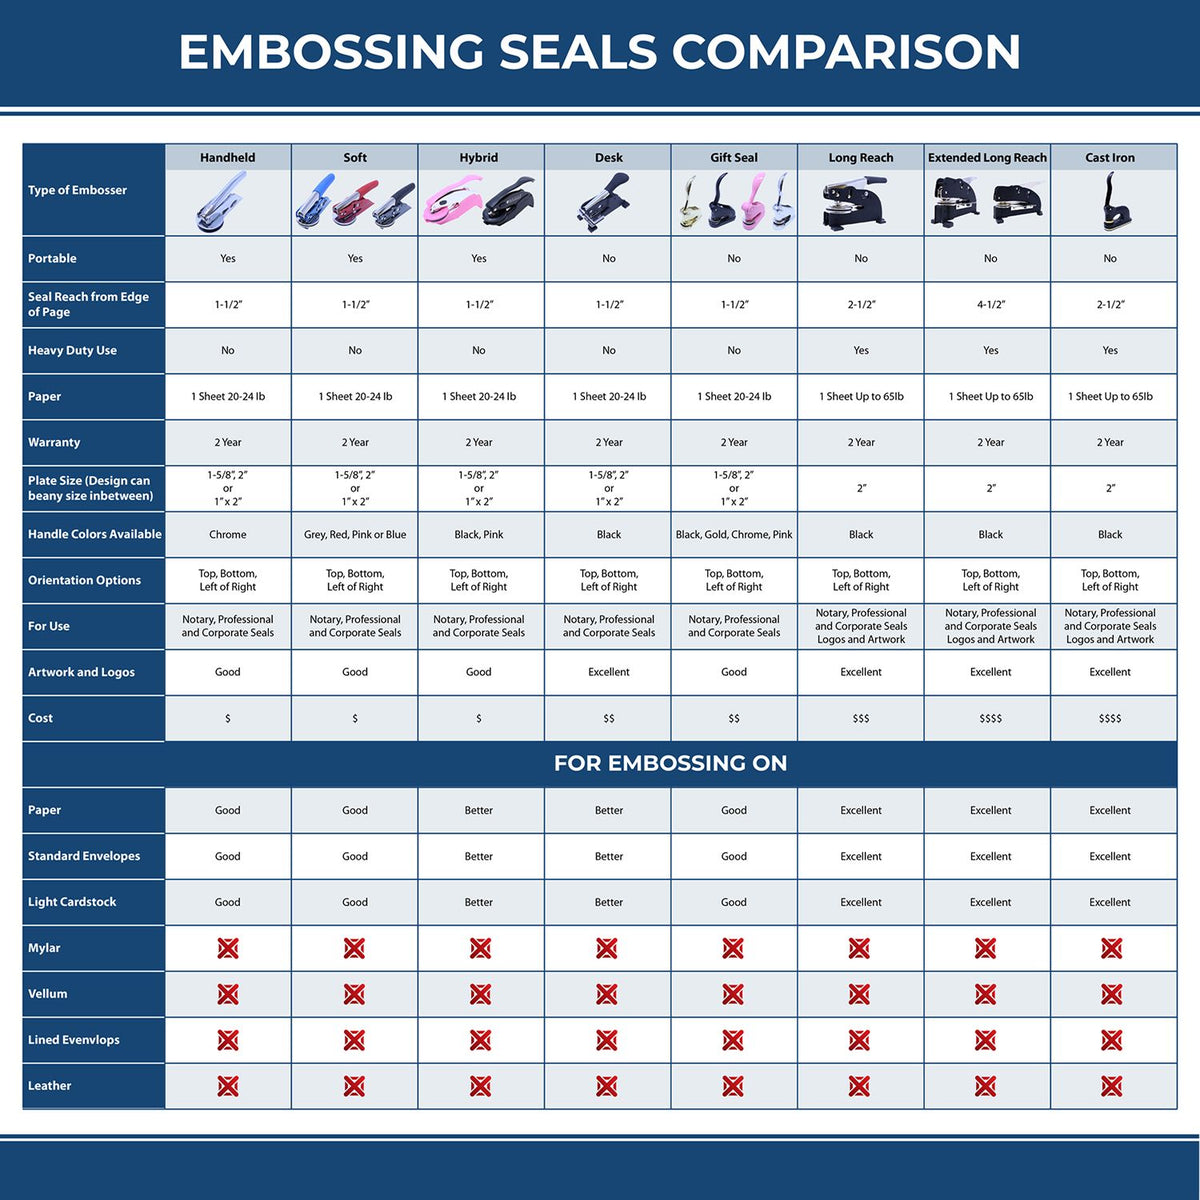 A comparison chart for the different types of mount models available for the Hybrid Delaware Engineer Seal